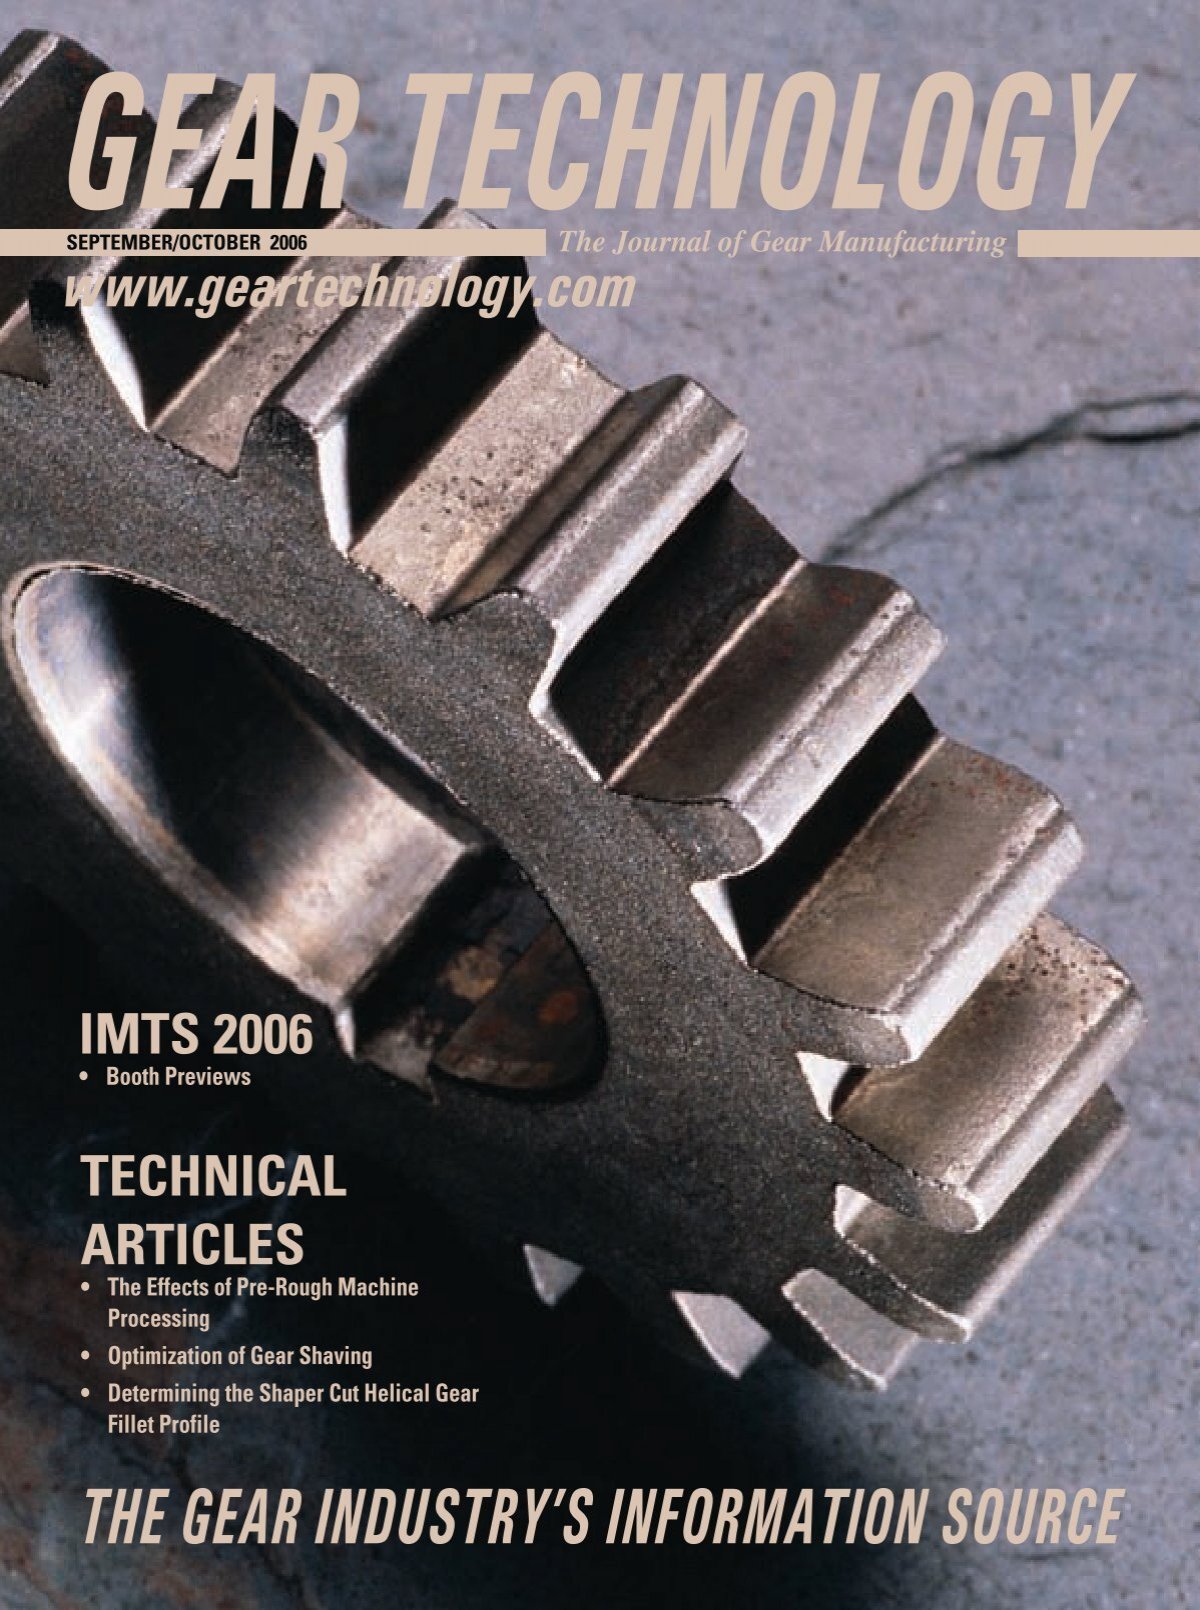 Download the September/October 2006 Issue in PDF format - Gear 